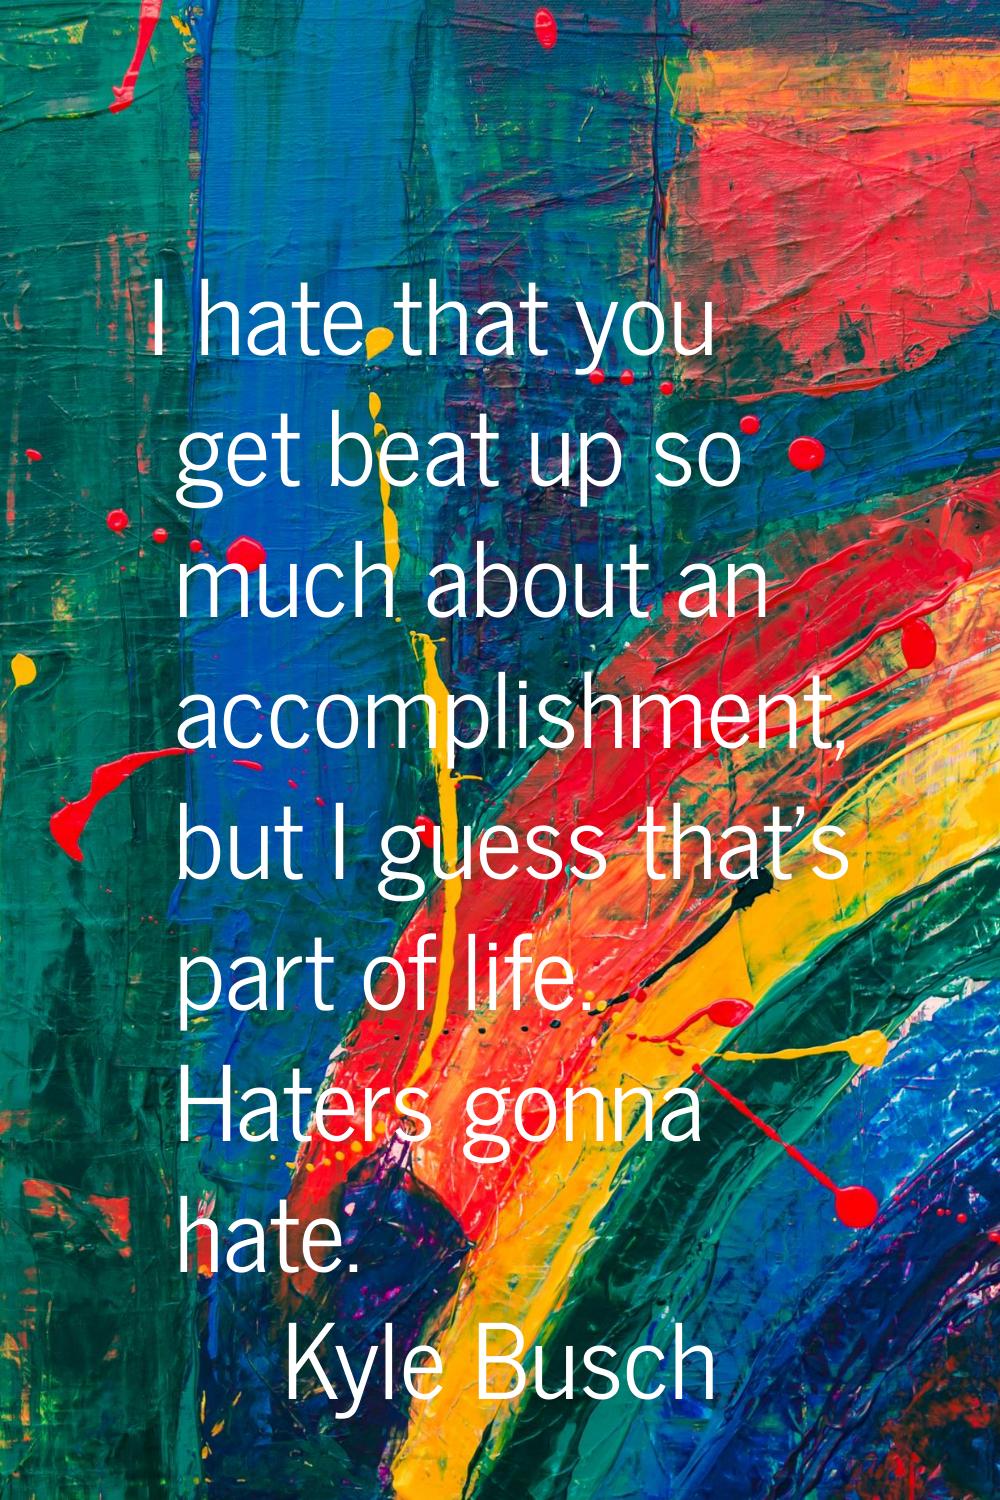 I hate that you get beat up so much about an accomplishment, but I guess that's part of life. Hater